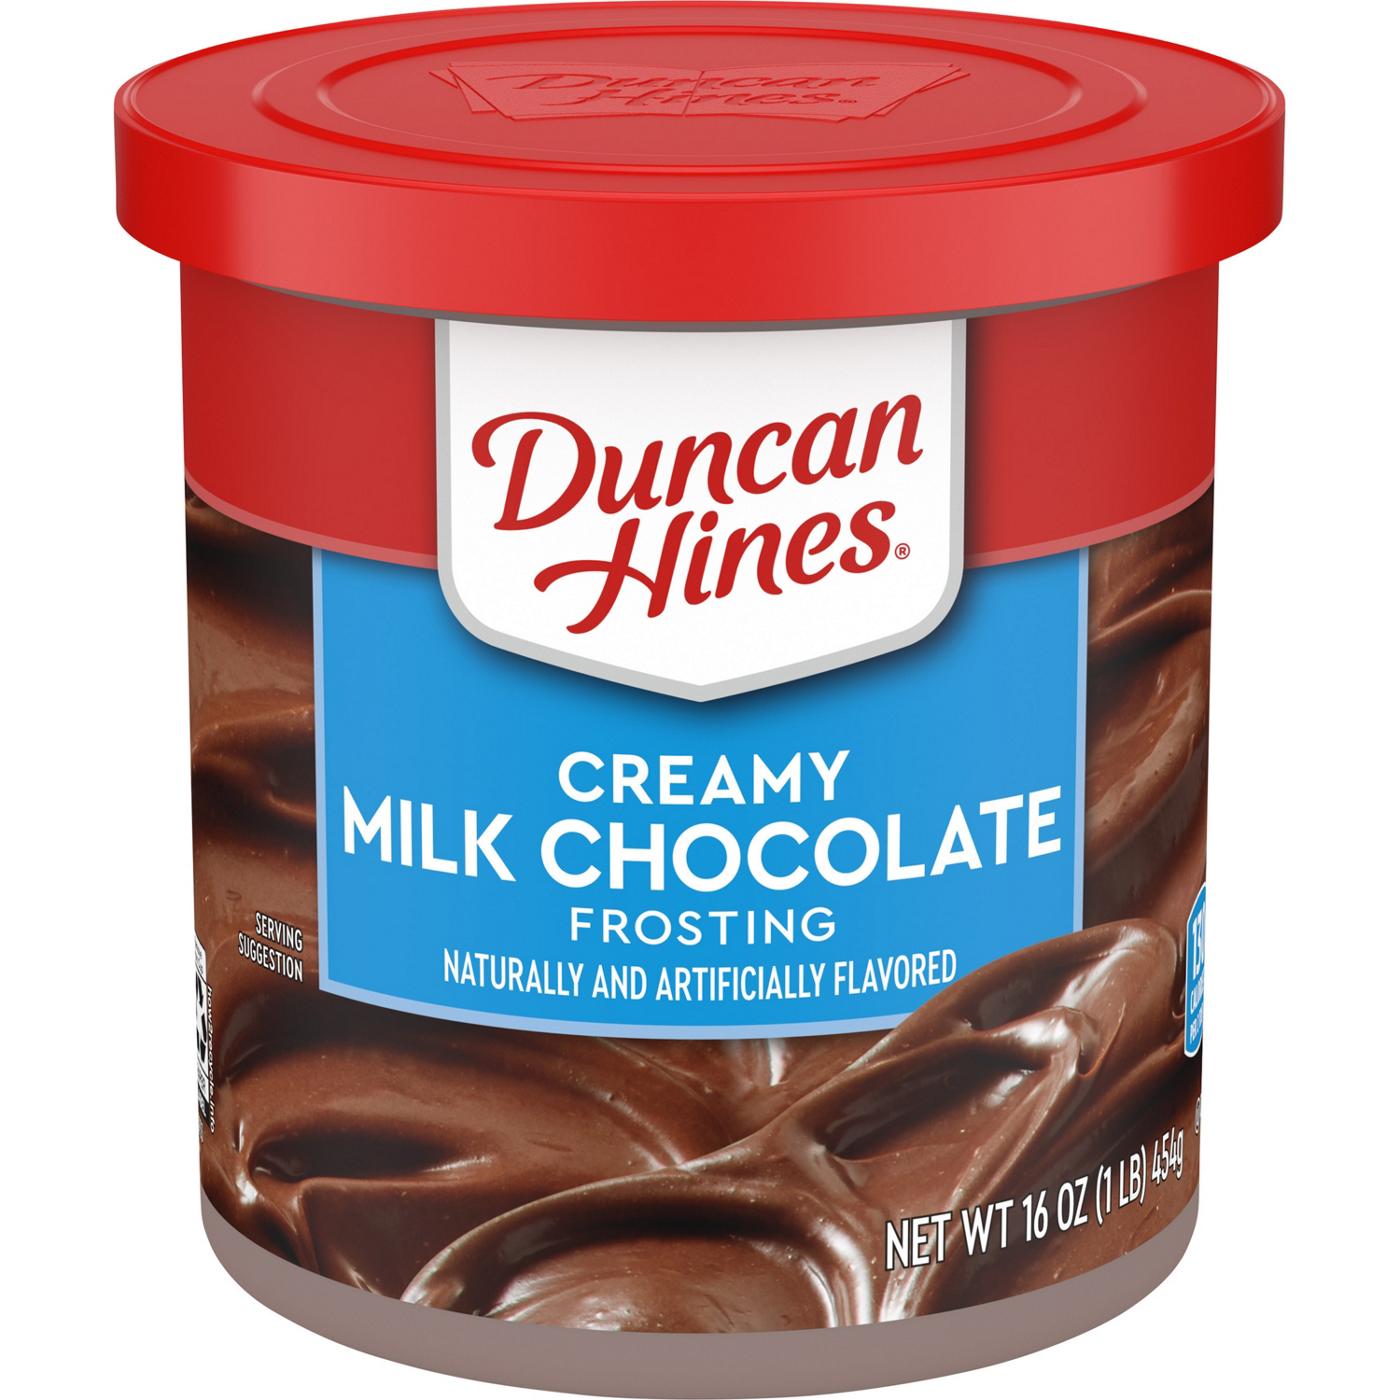 Duncan Hines Creamy Milk Chocolate Frosting; image 1 of 4